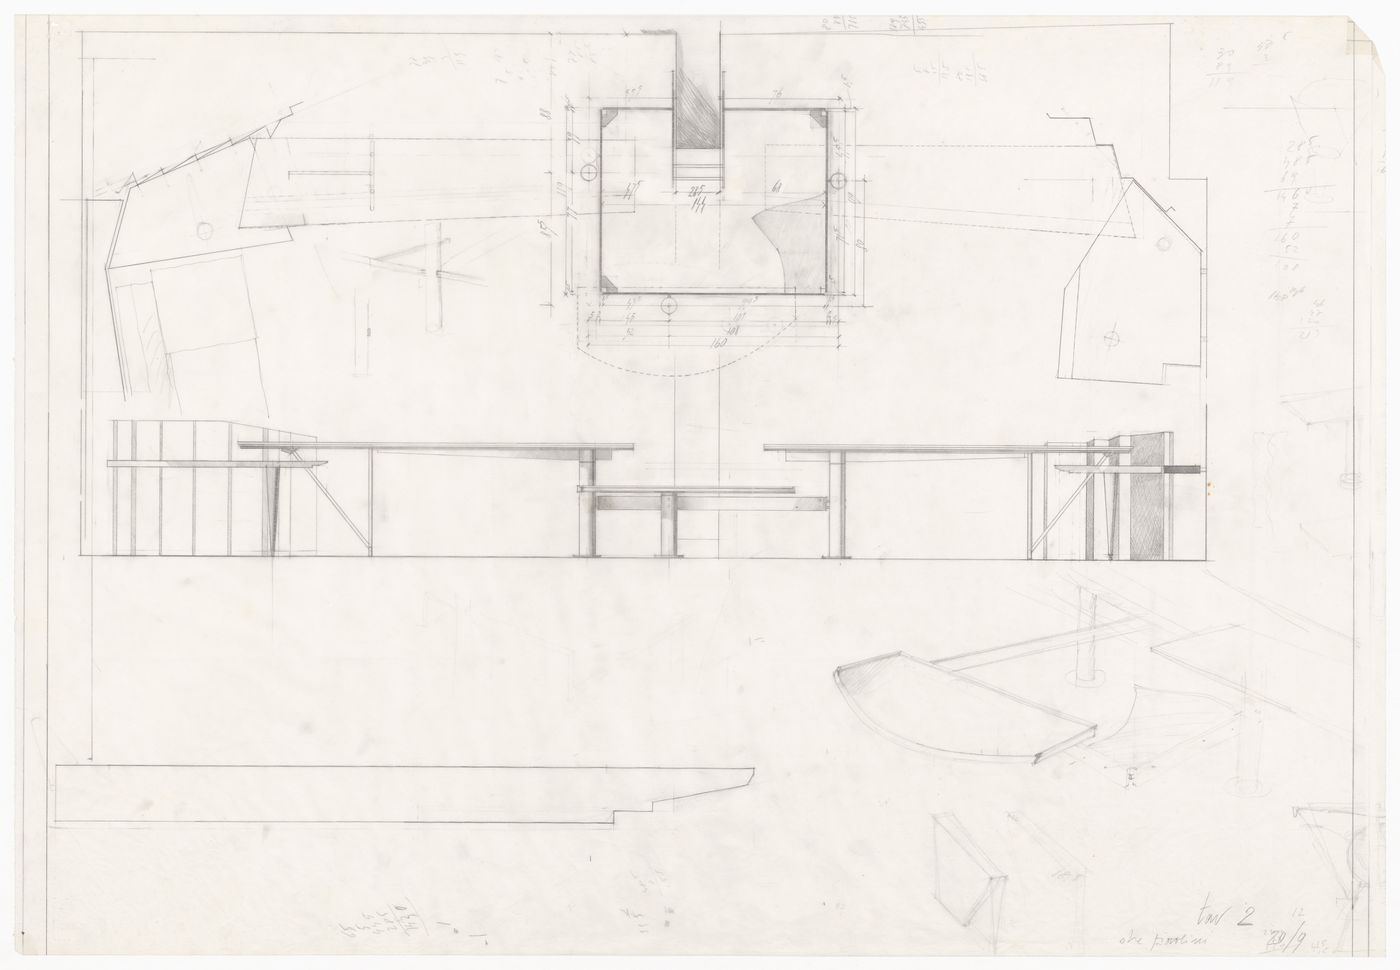 Sketches, elevations, and plans for Casa De Paolini, Milan, Italy